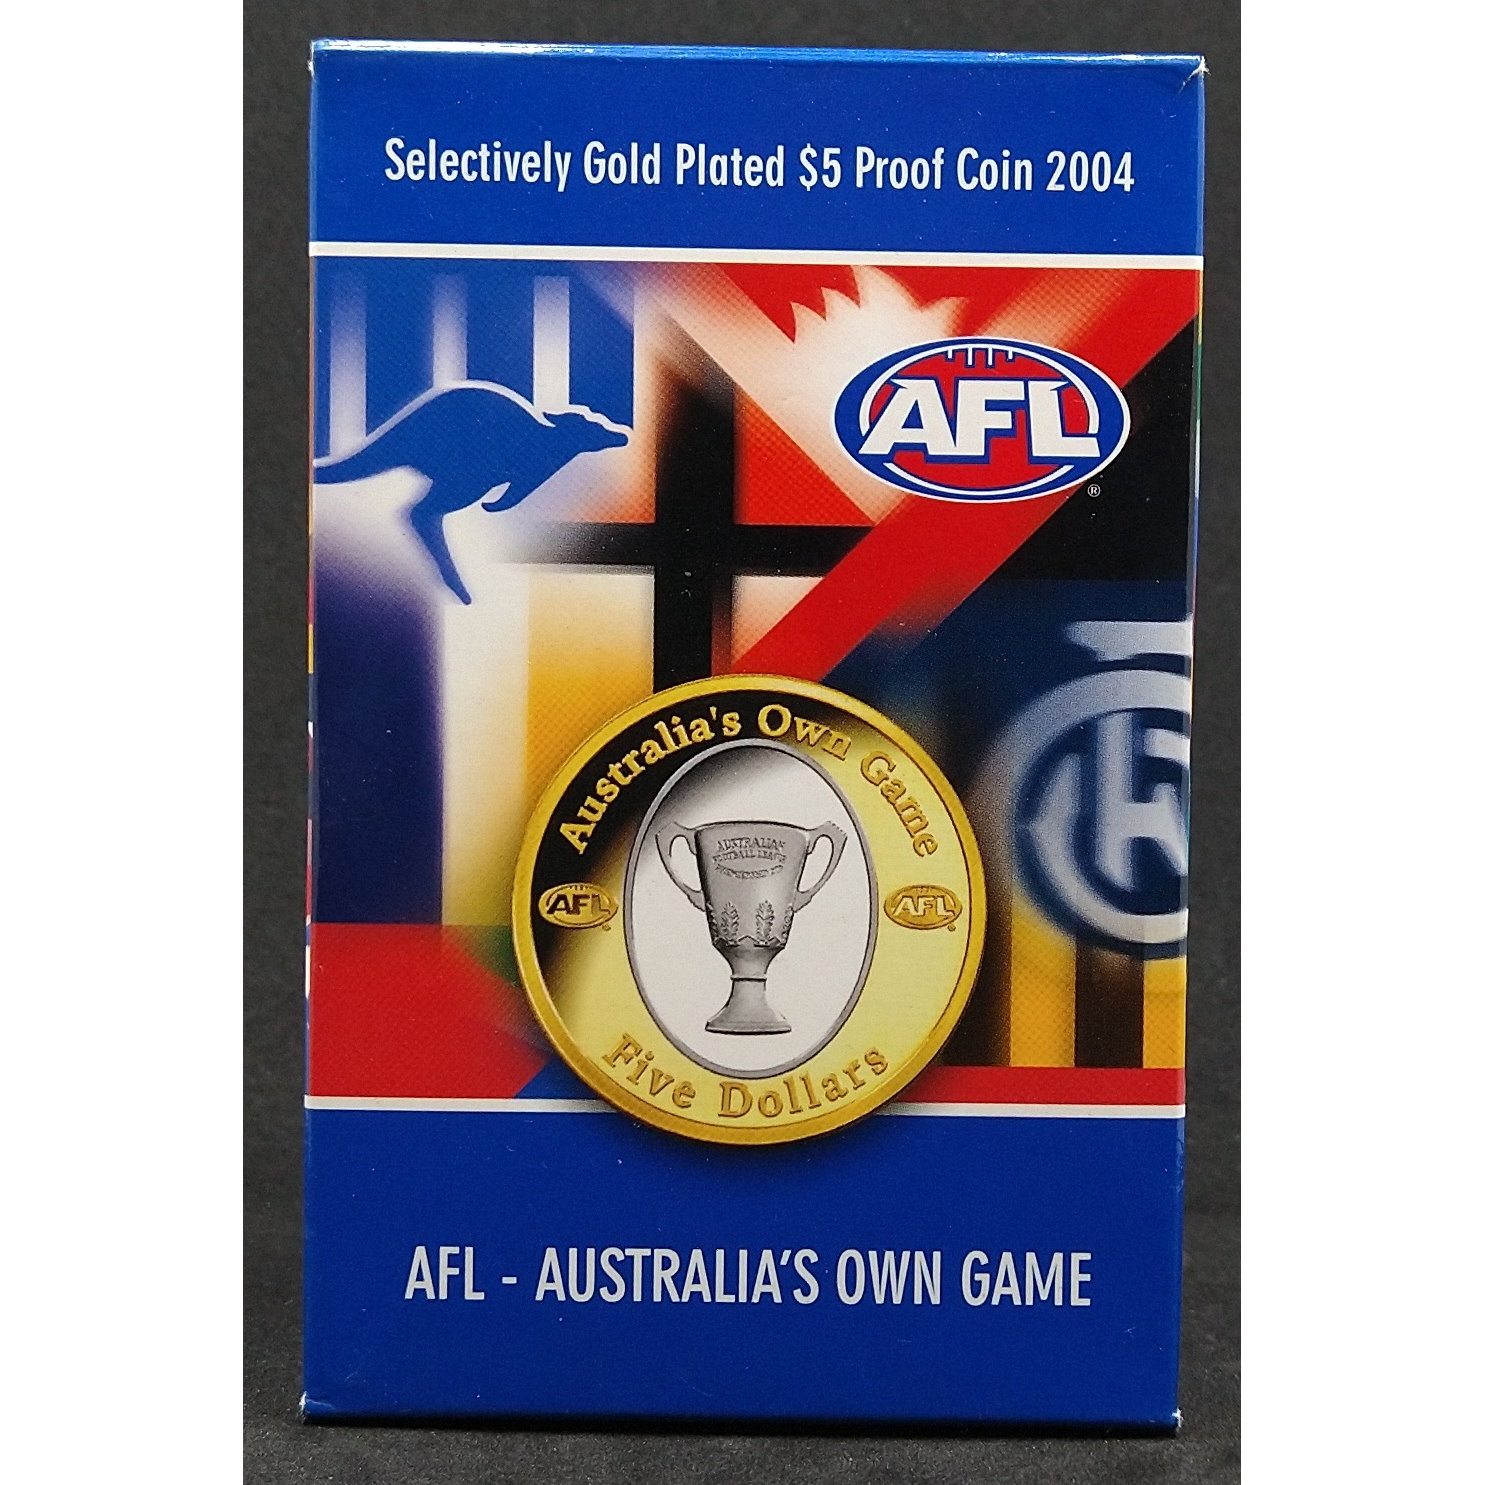 2004 AFL Football $5 Selectively Gold Plated Proof Coin